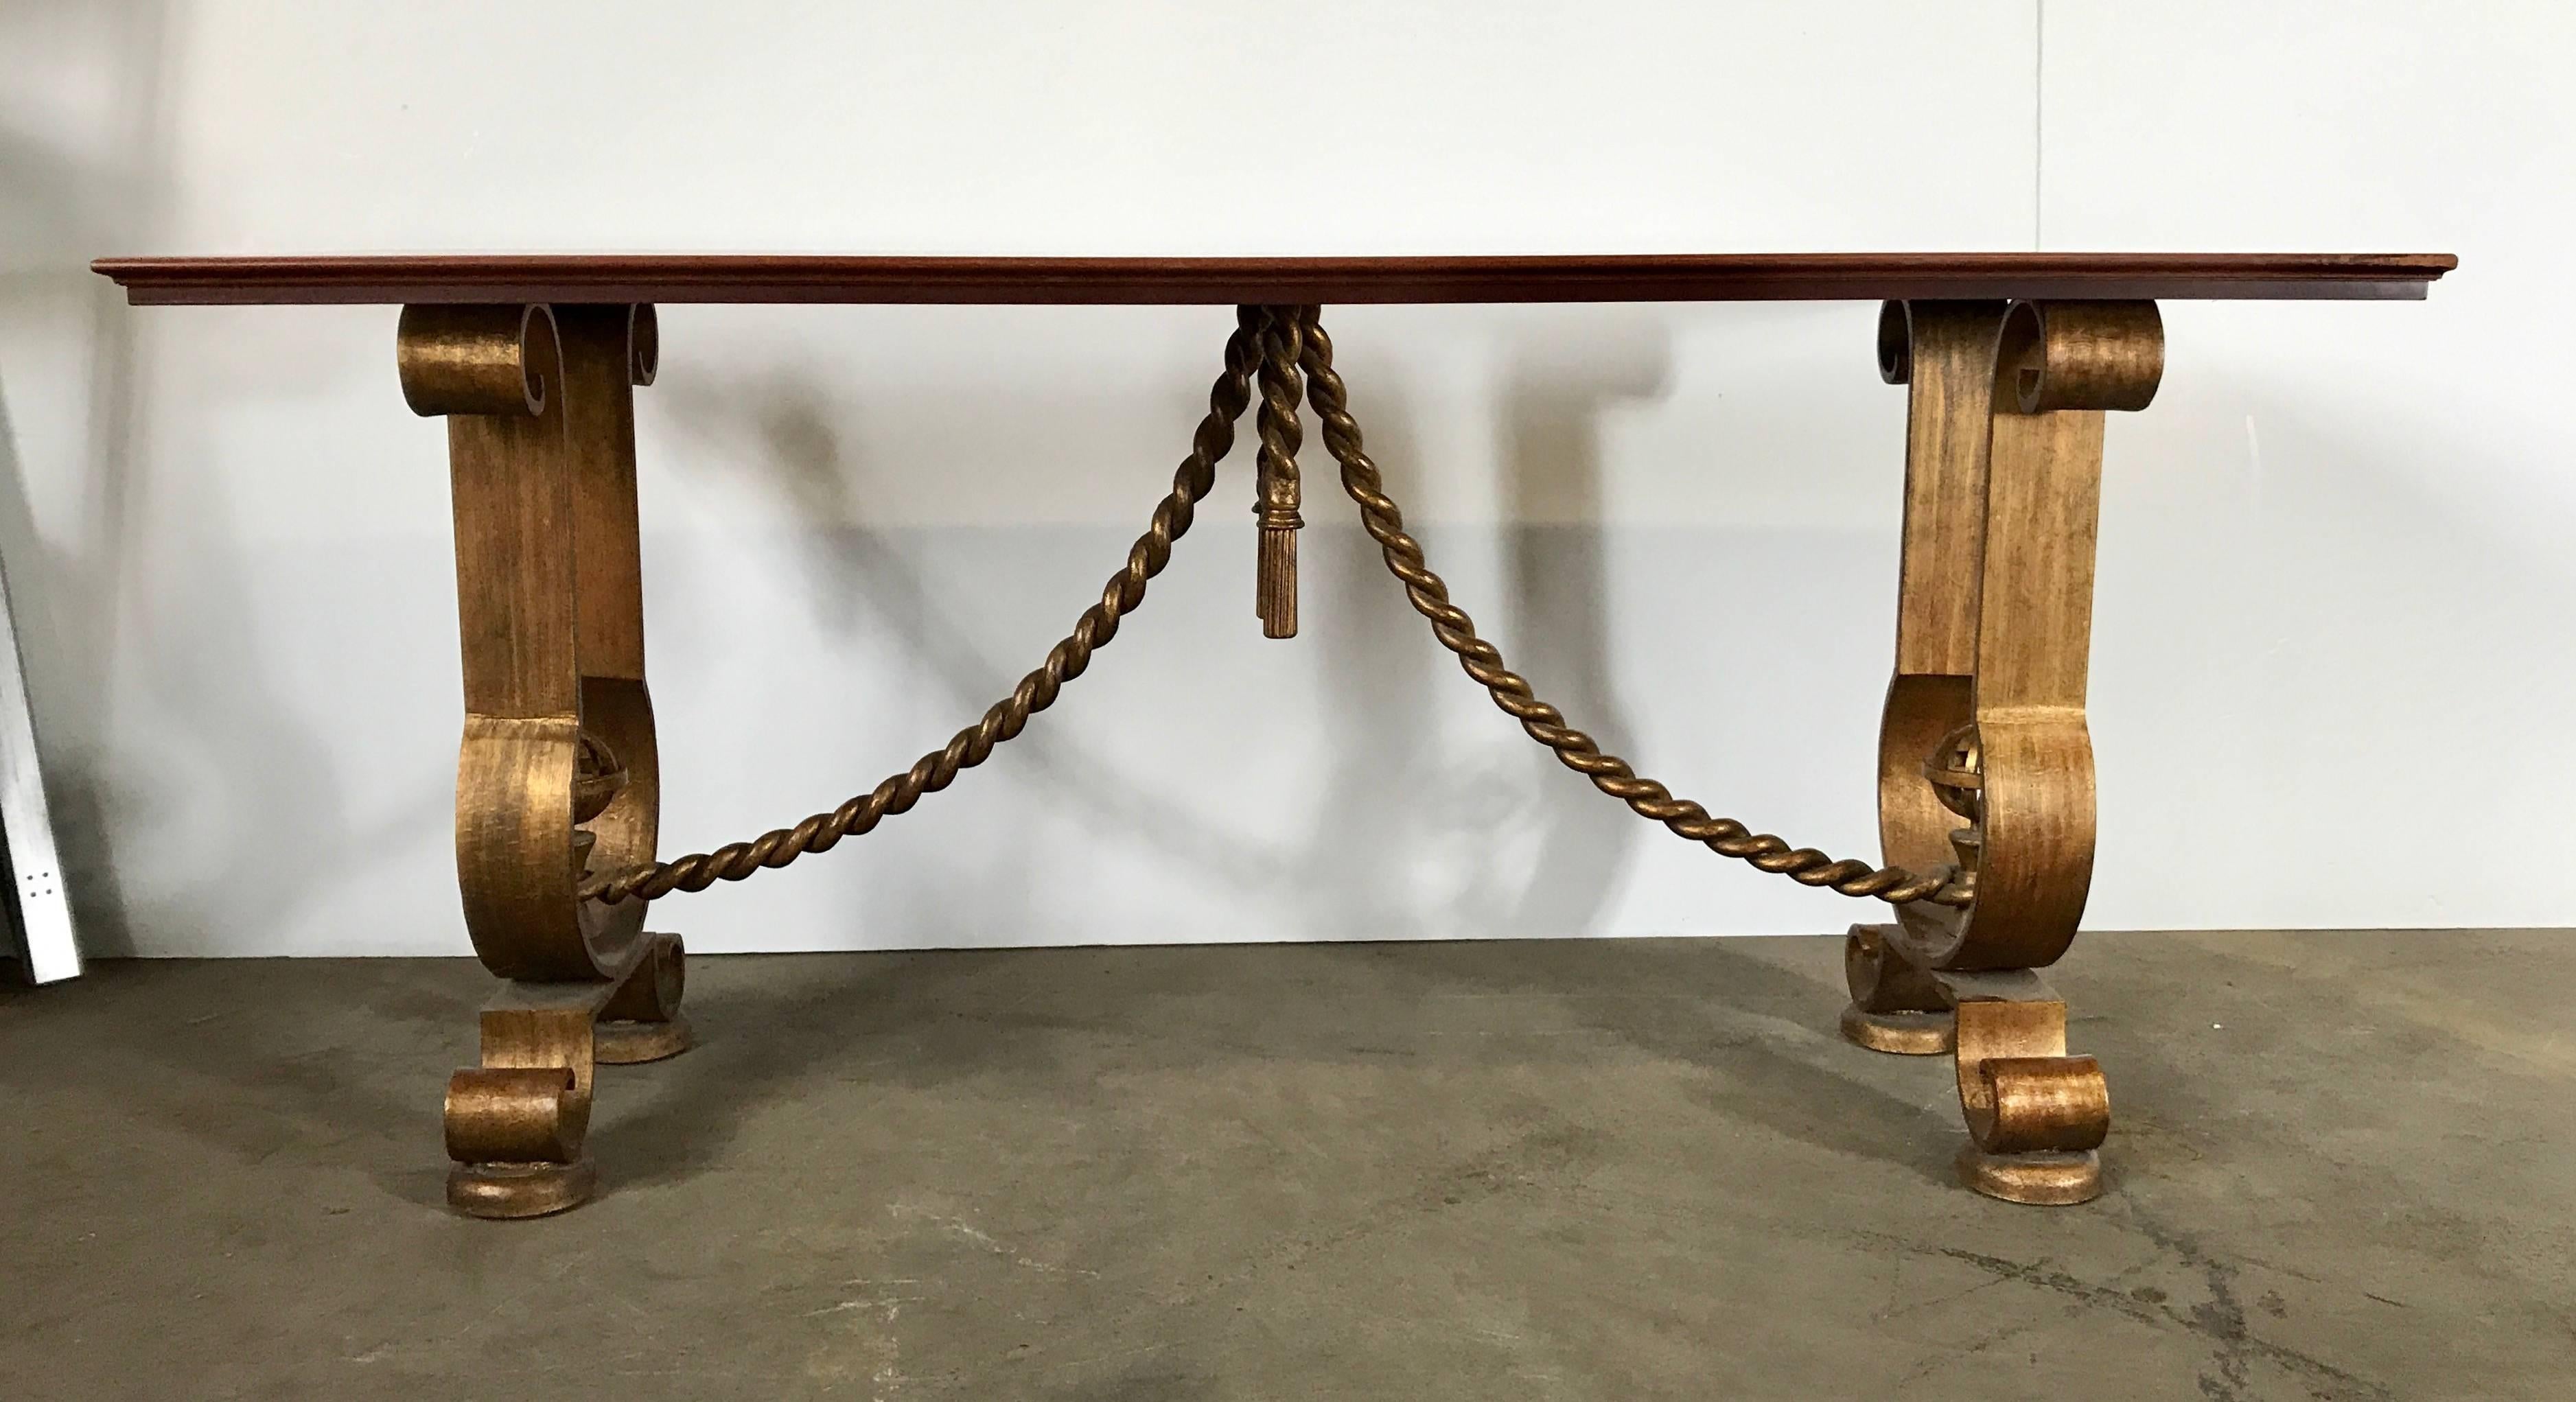 Pair of French gold gilt console tables Murray's Iron Works manner of G. Poillerat. Classic design, wonderful gold gilding, restored wood tops, hand delivery avail to New York City or anywhere en route from Buffalo New York.